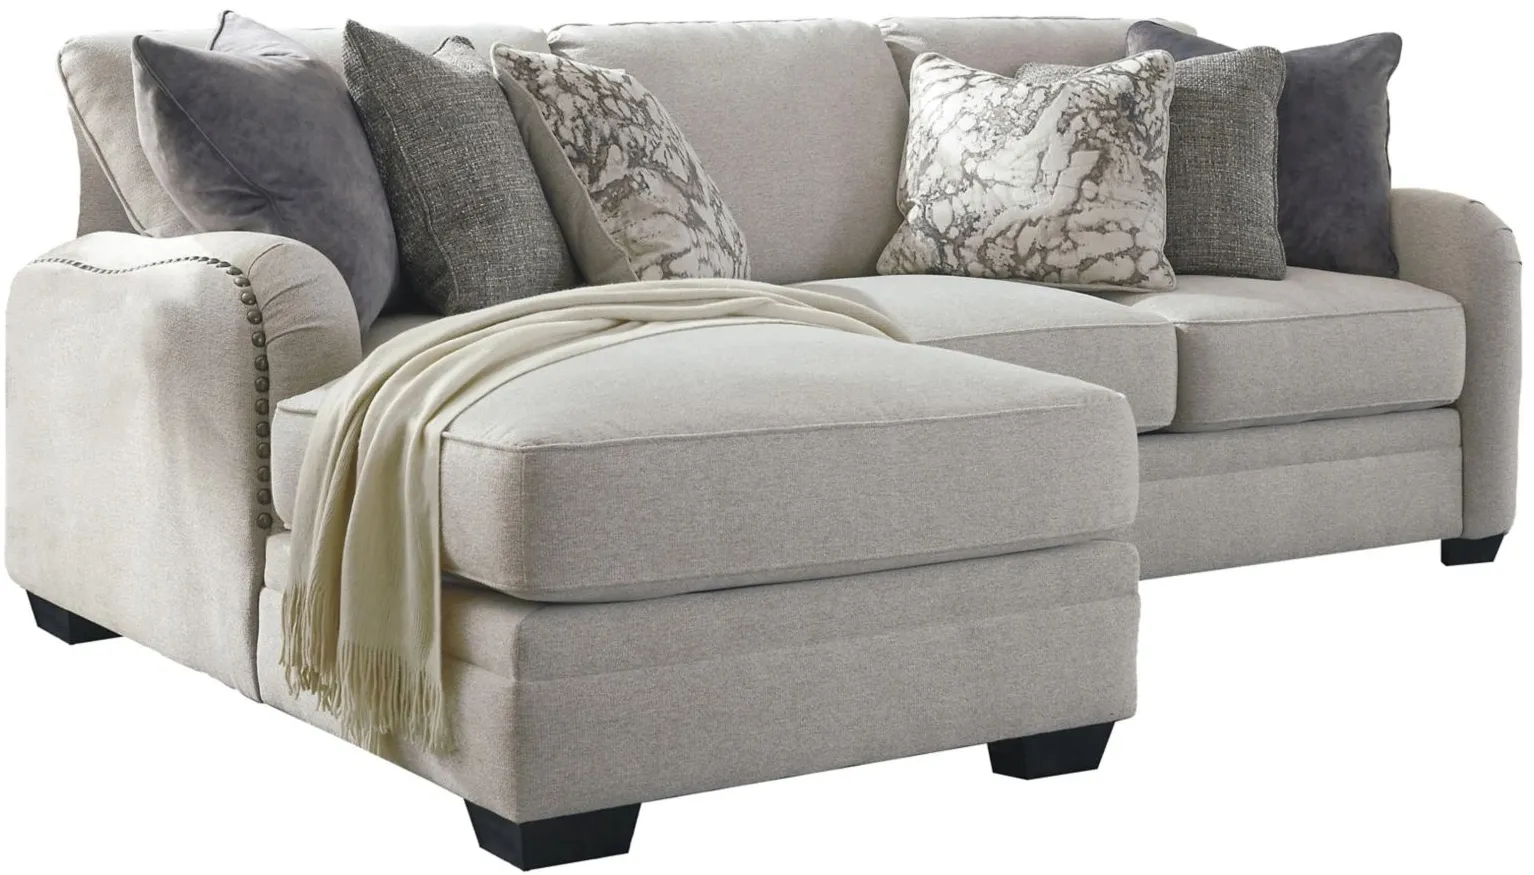 Dellara 2-pc. Sectional with Chaise in Chalk by Ashley Furniture